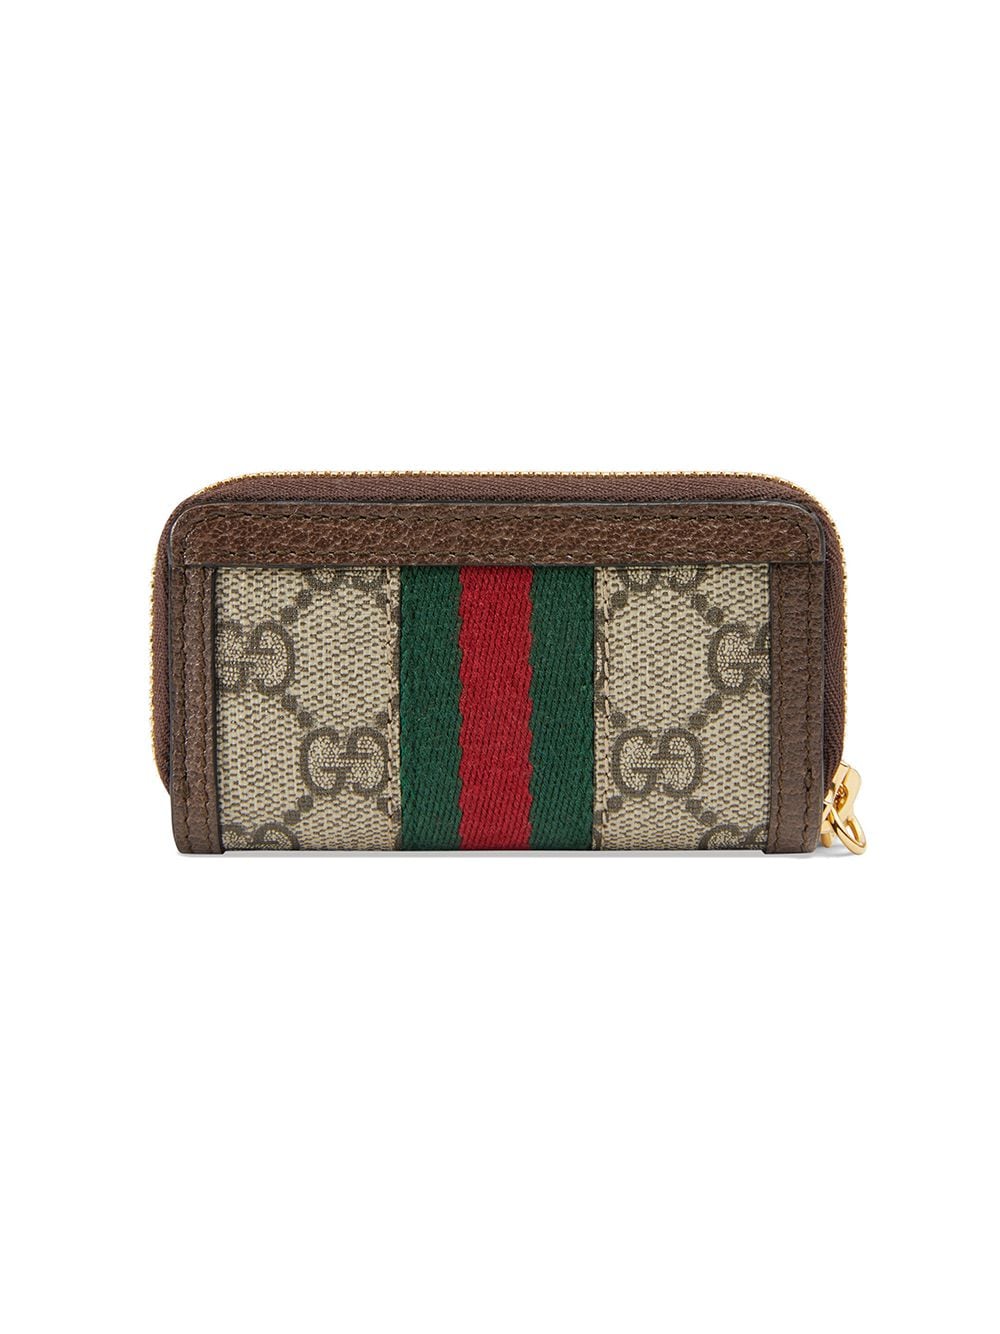 Ophidia GG key pouch in beige and ebony